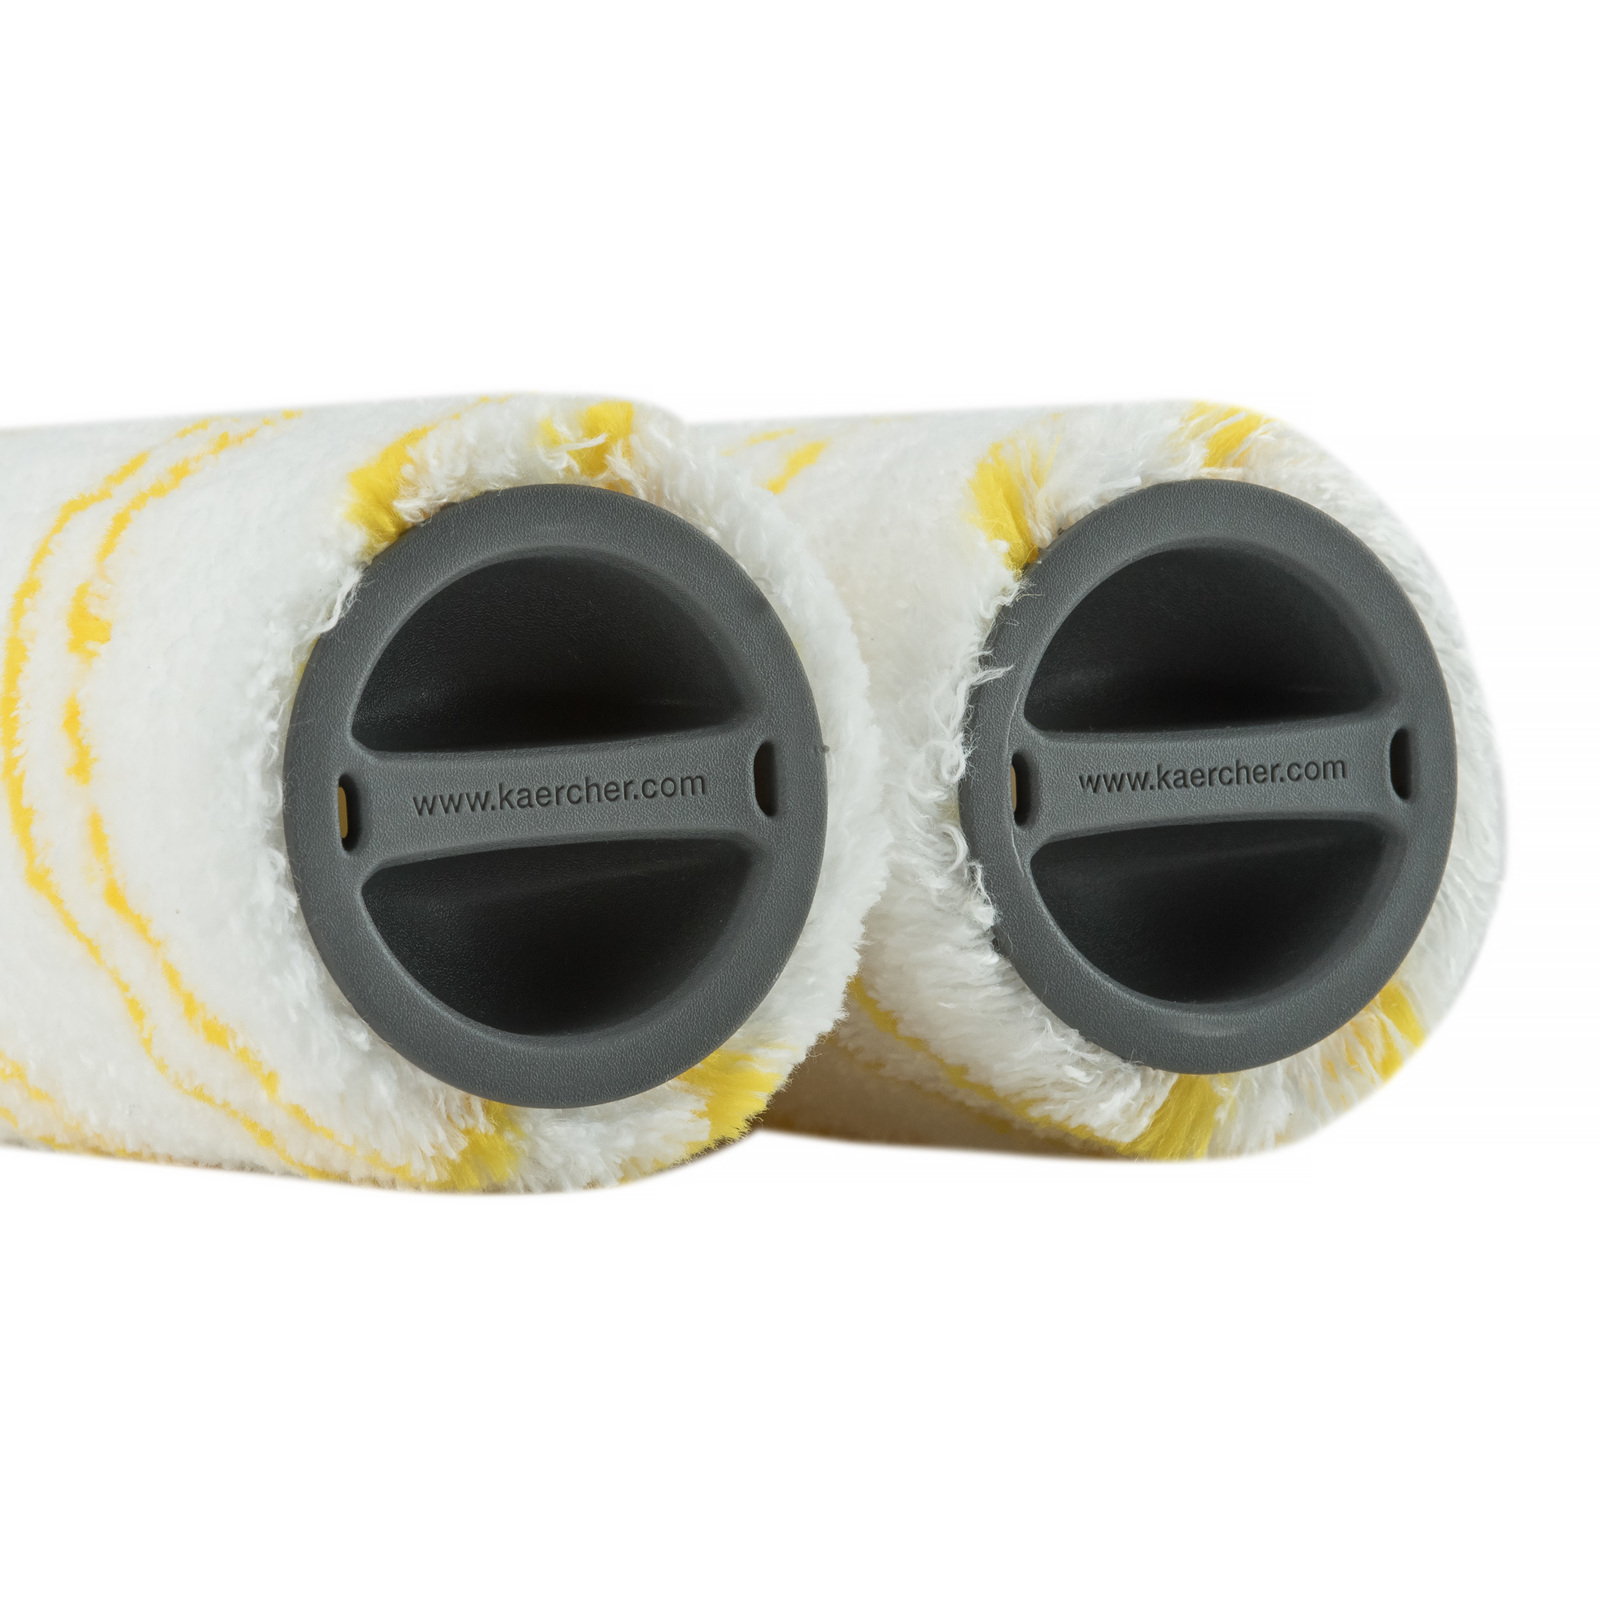 Details about   Replacement Roller Brush Set Roller Covers Cleaner Parts for Karcher FC3 FC5 